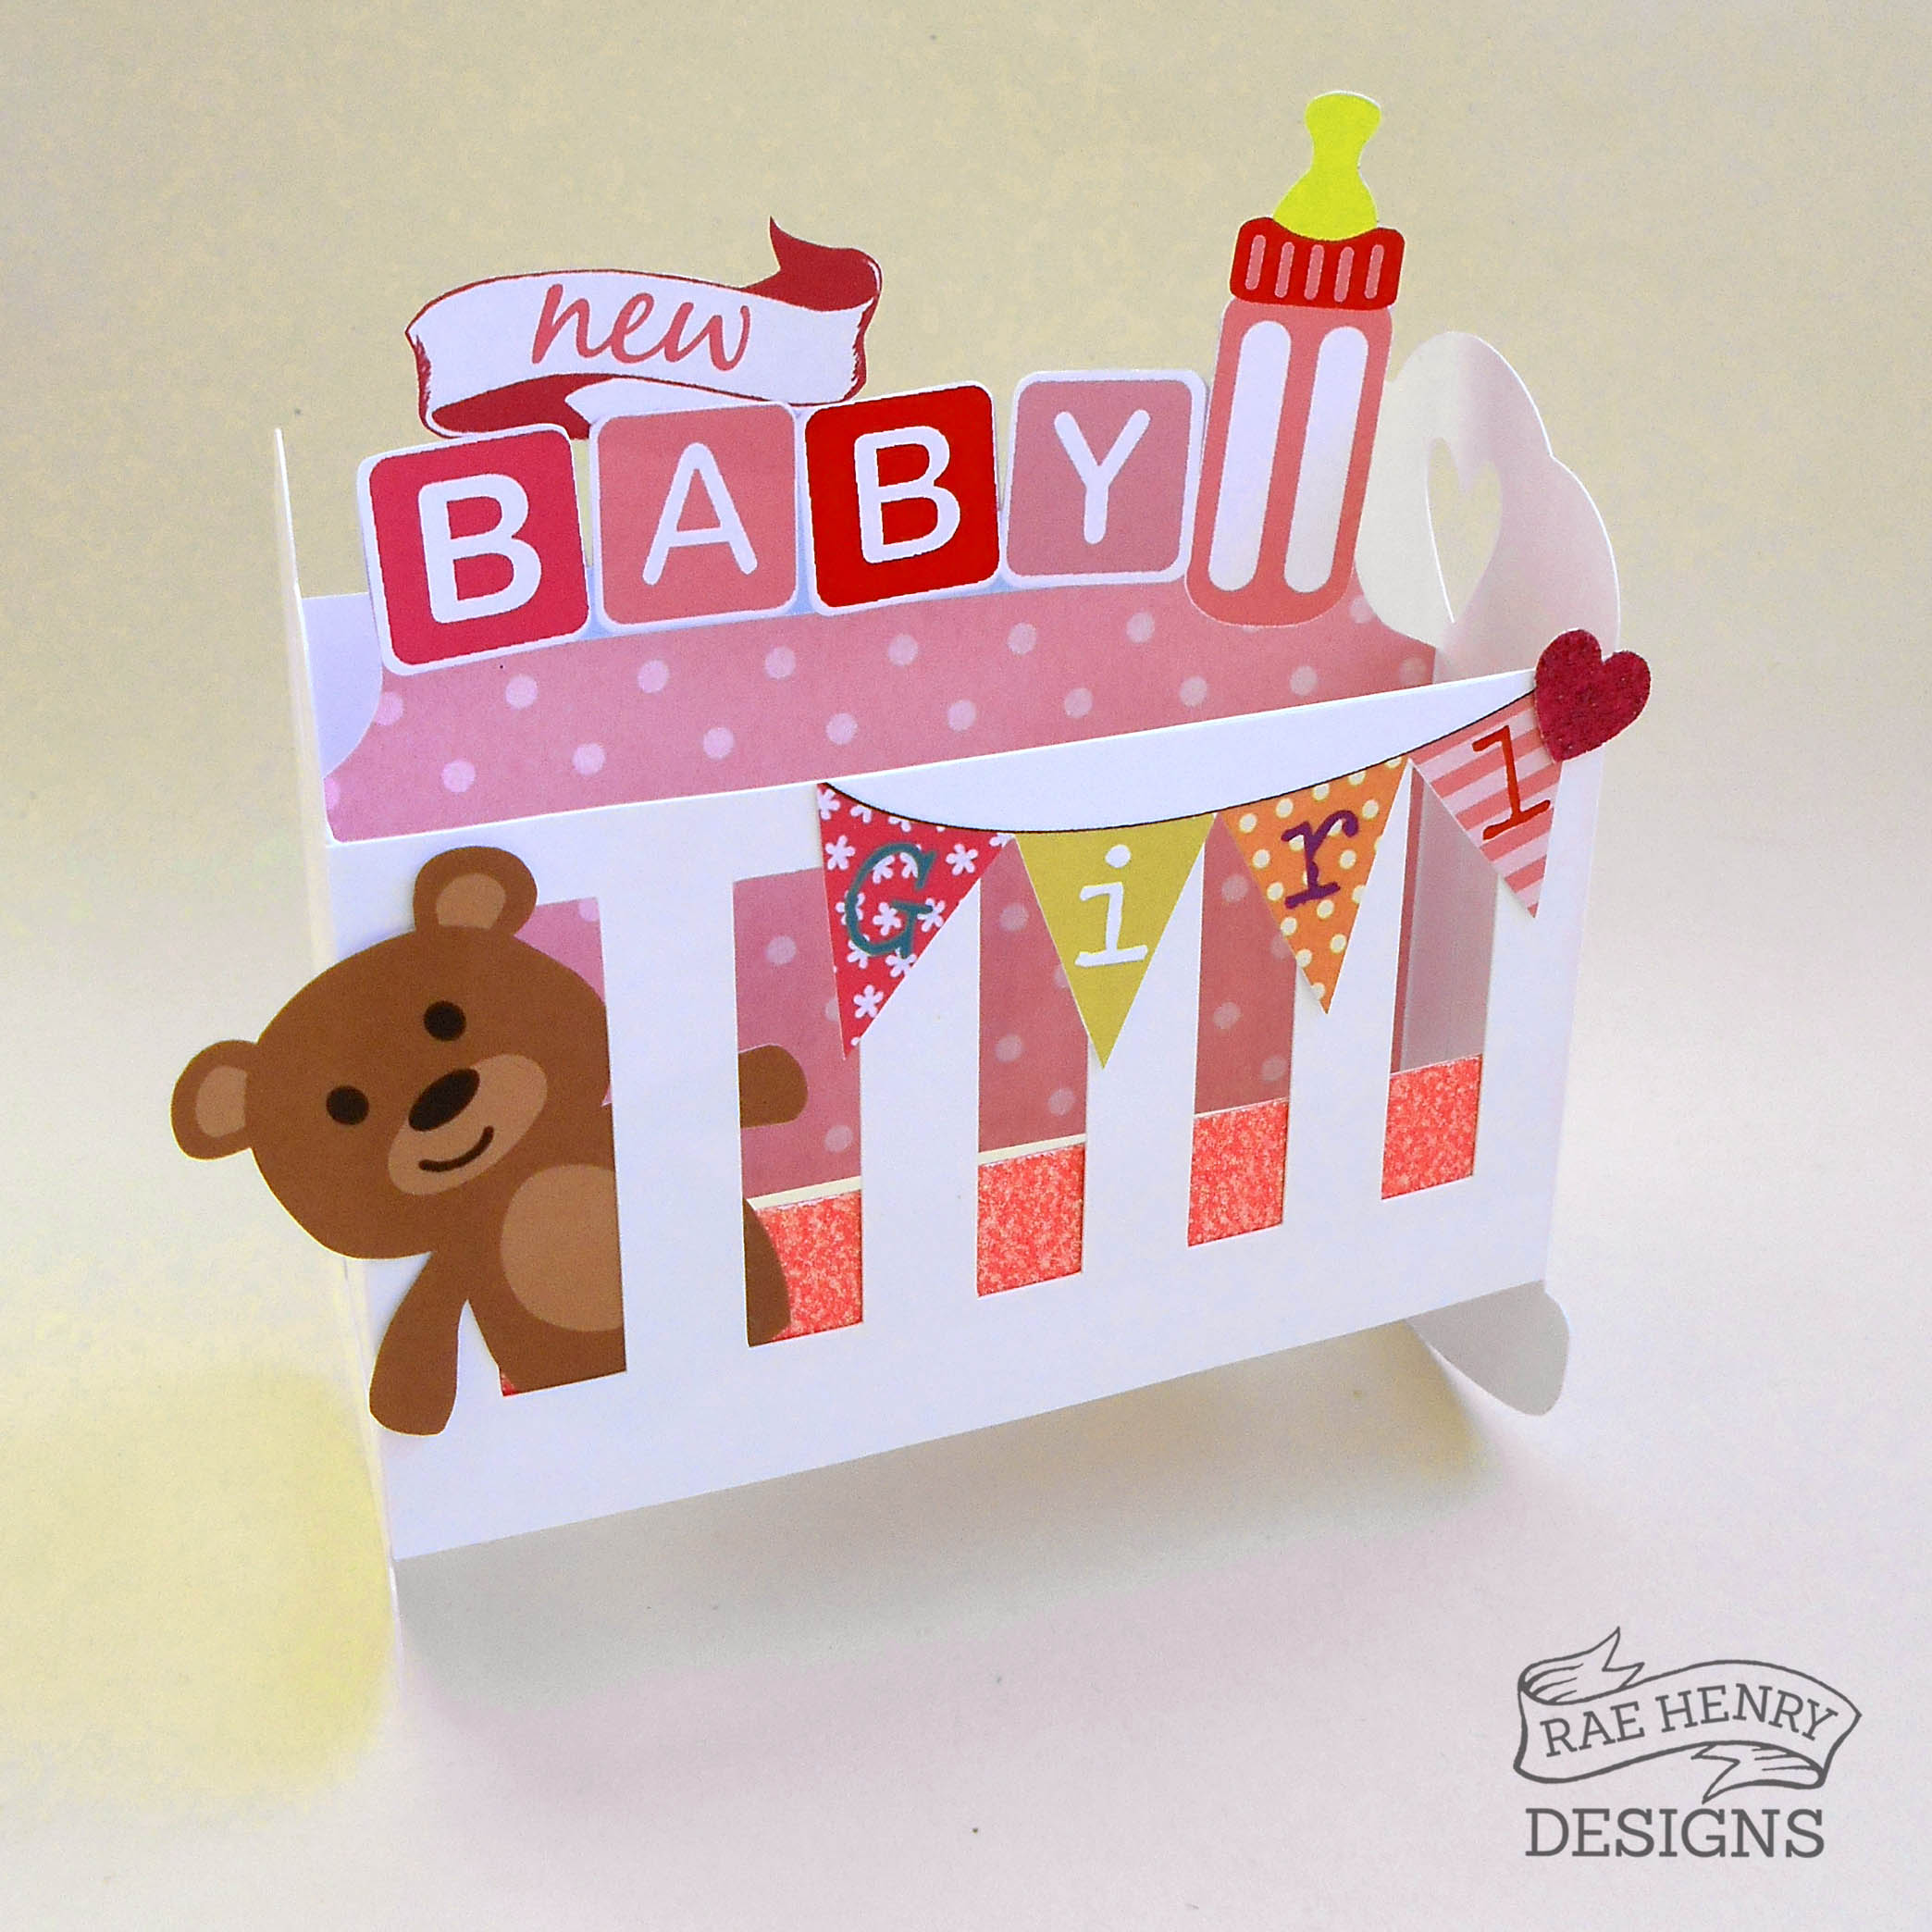 Pink Cot New Baby Grandchild Greetings Card Teddy Bear & Bunting 7.5 x 5.25